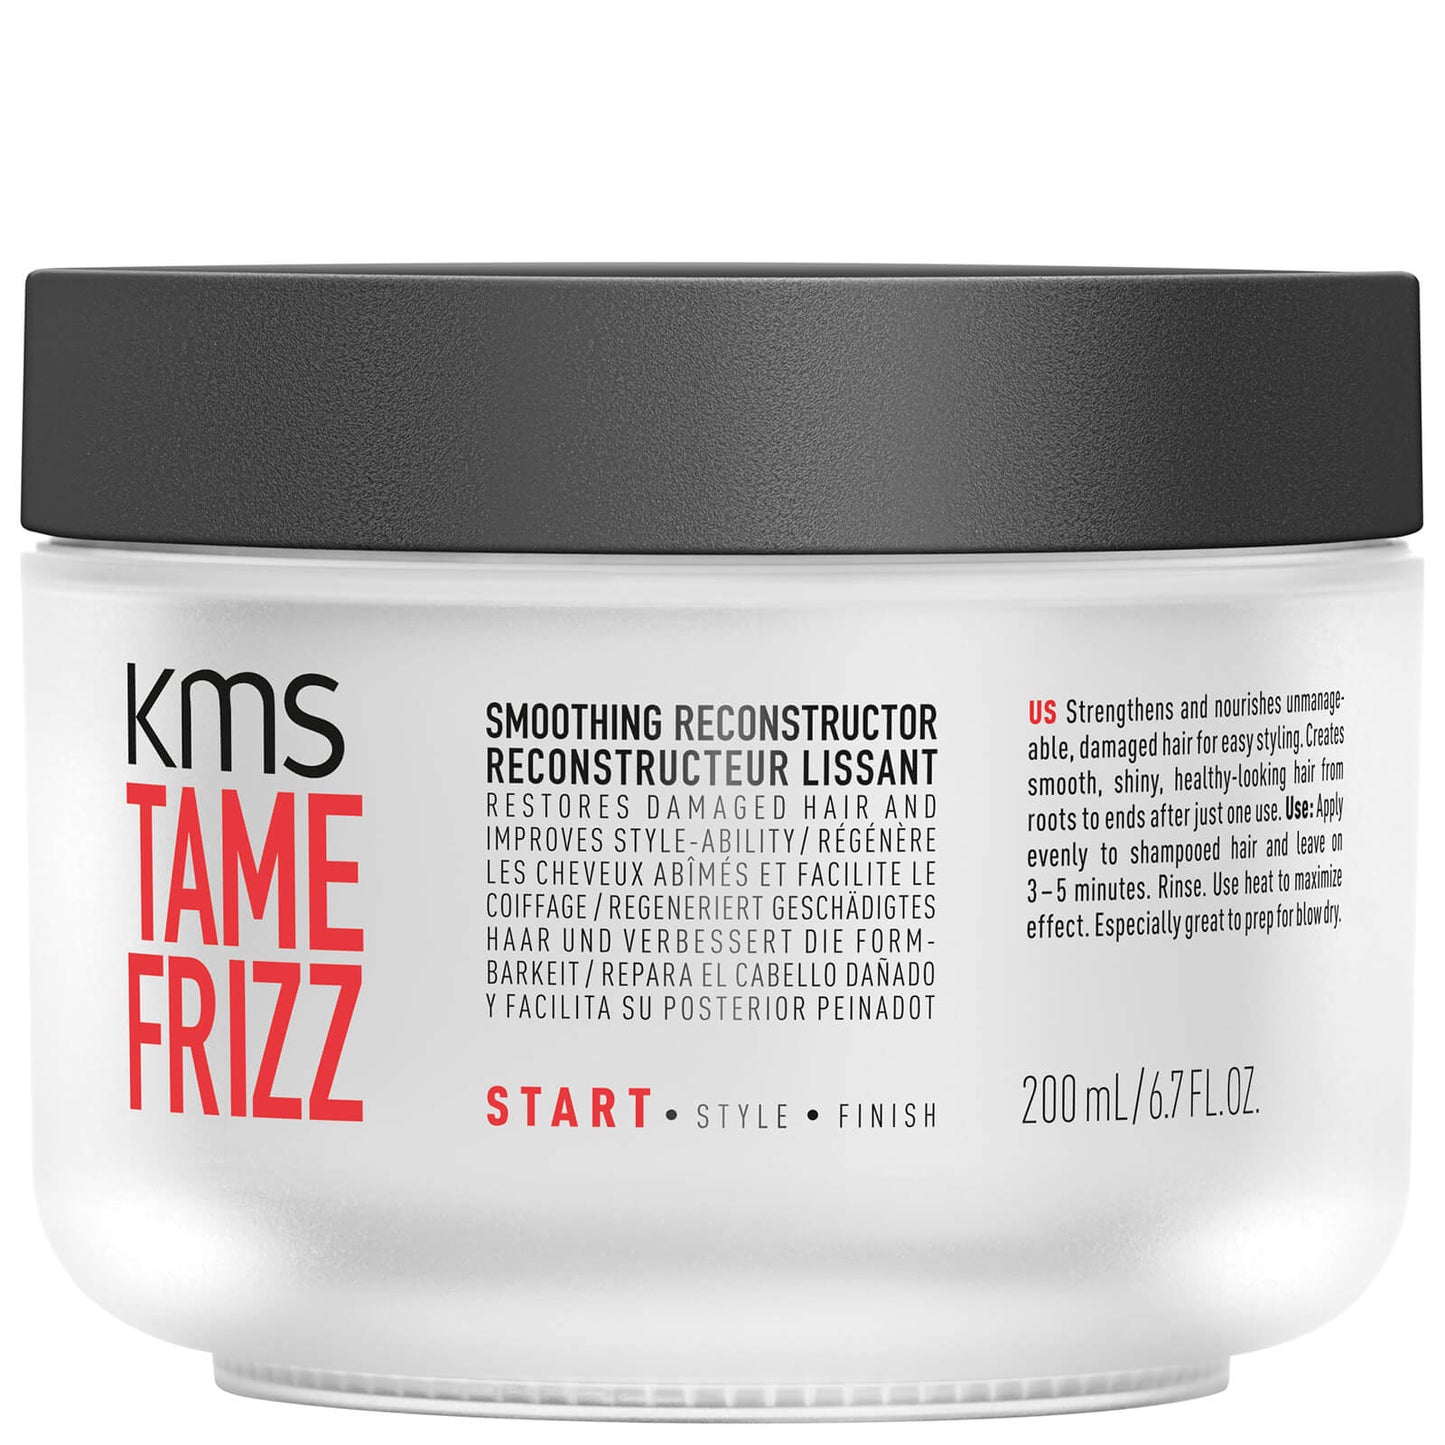 KMS TAMEFRIZZ SMOOTHING RECONSTRUCTOR 200 ml